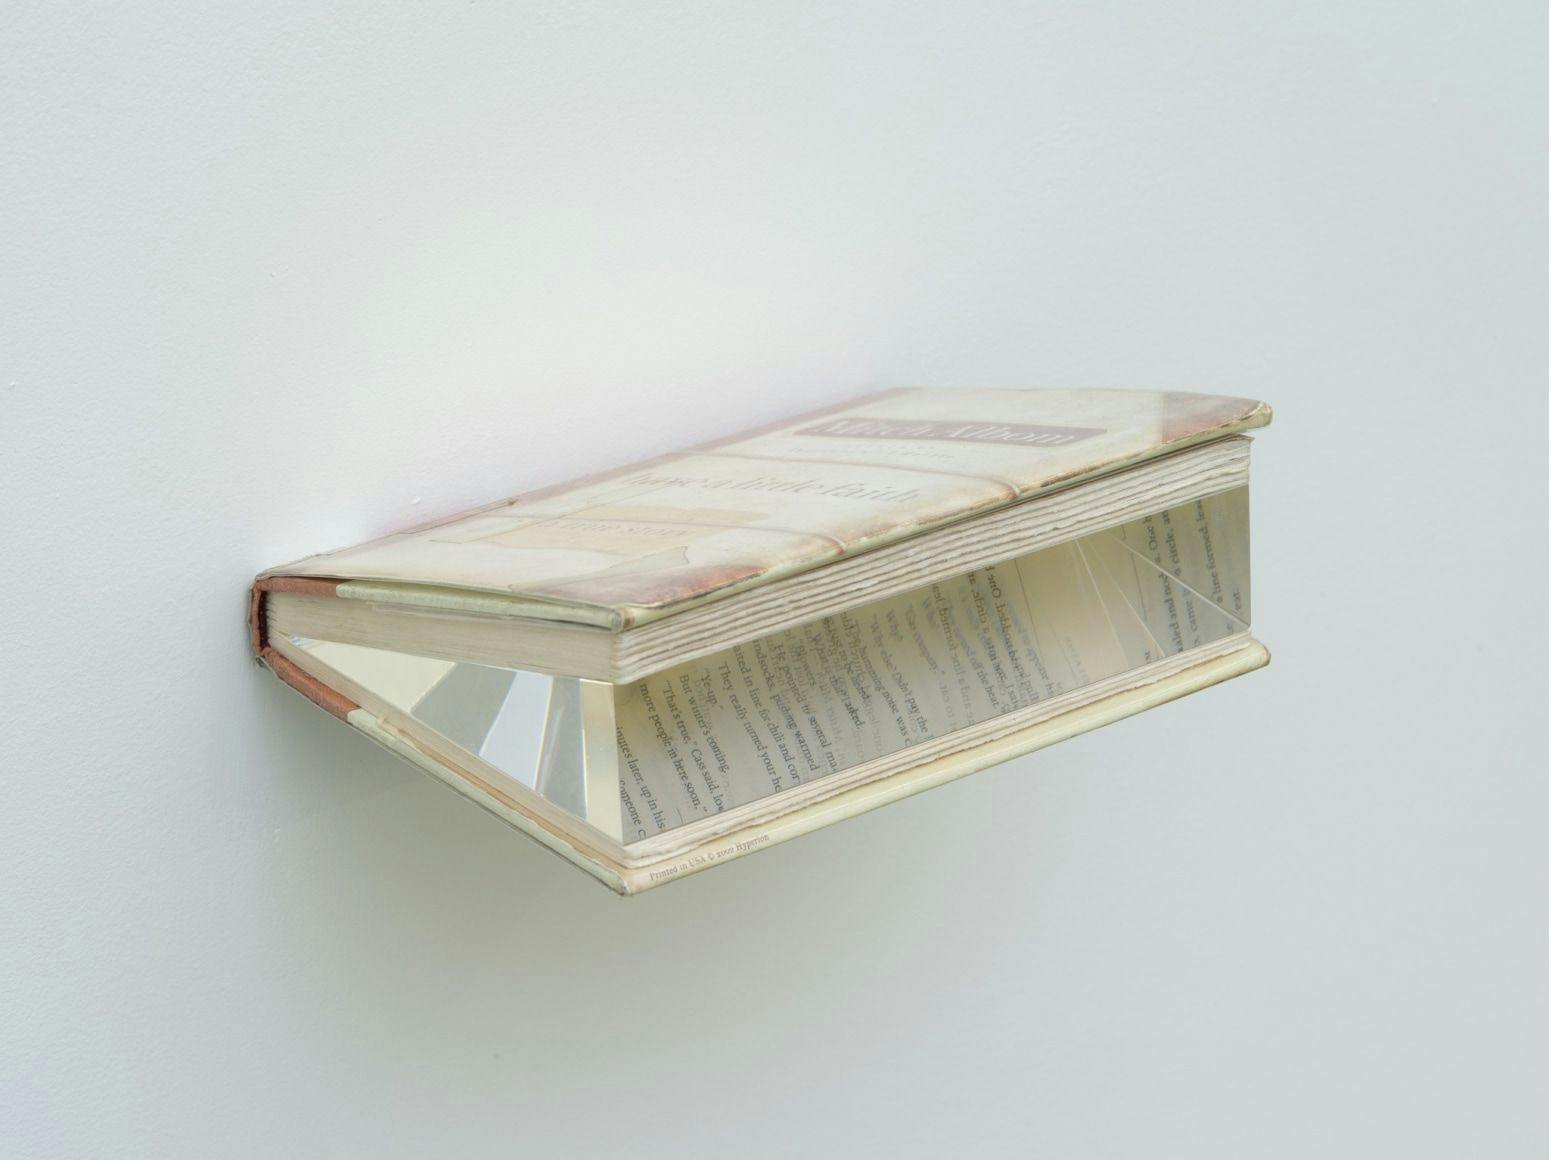 Untitled, n.d., Library book, glass, pressed flowers, dimensions variable, photo courtesy of Natalie Dilenno